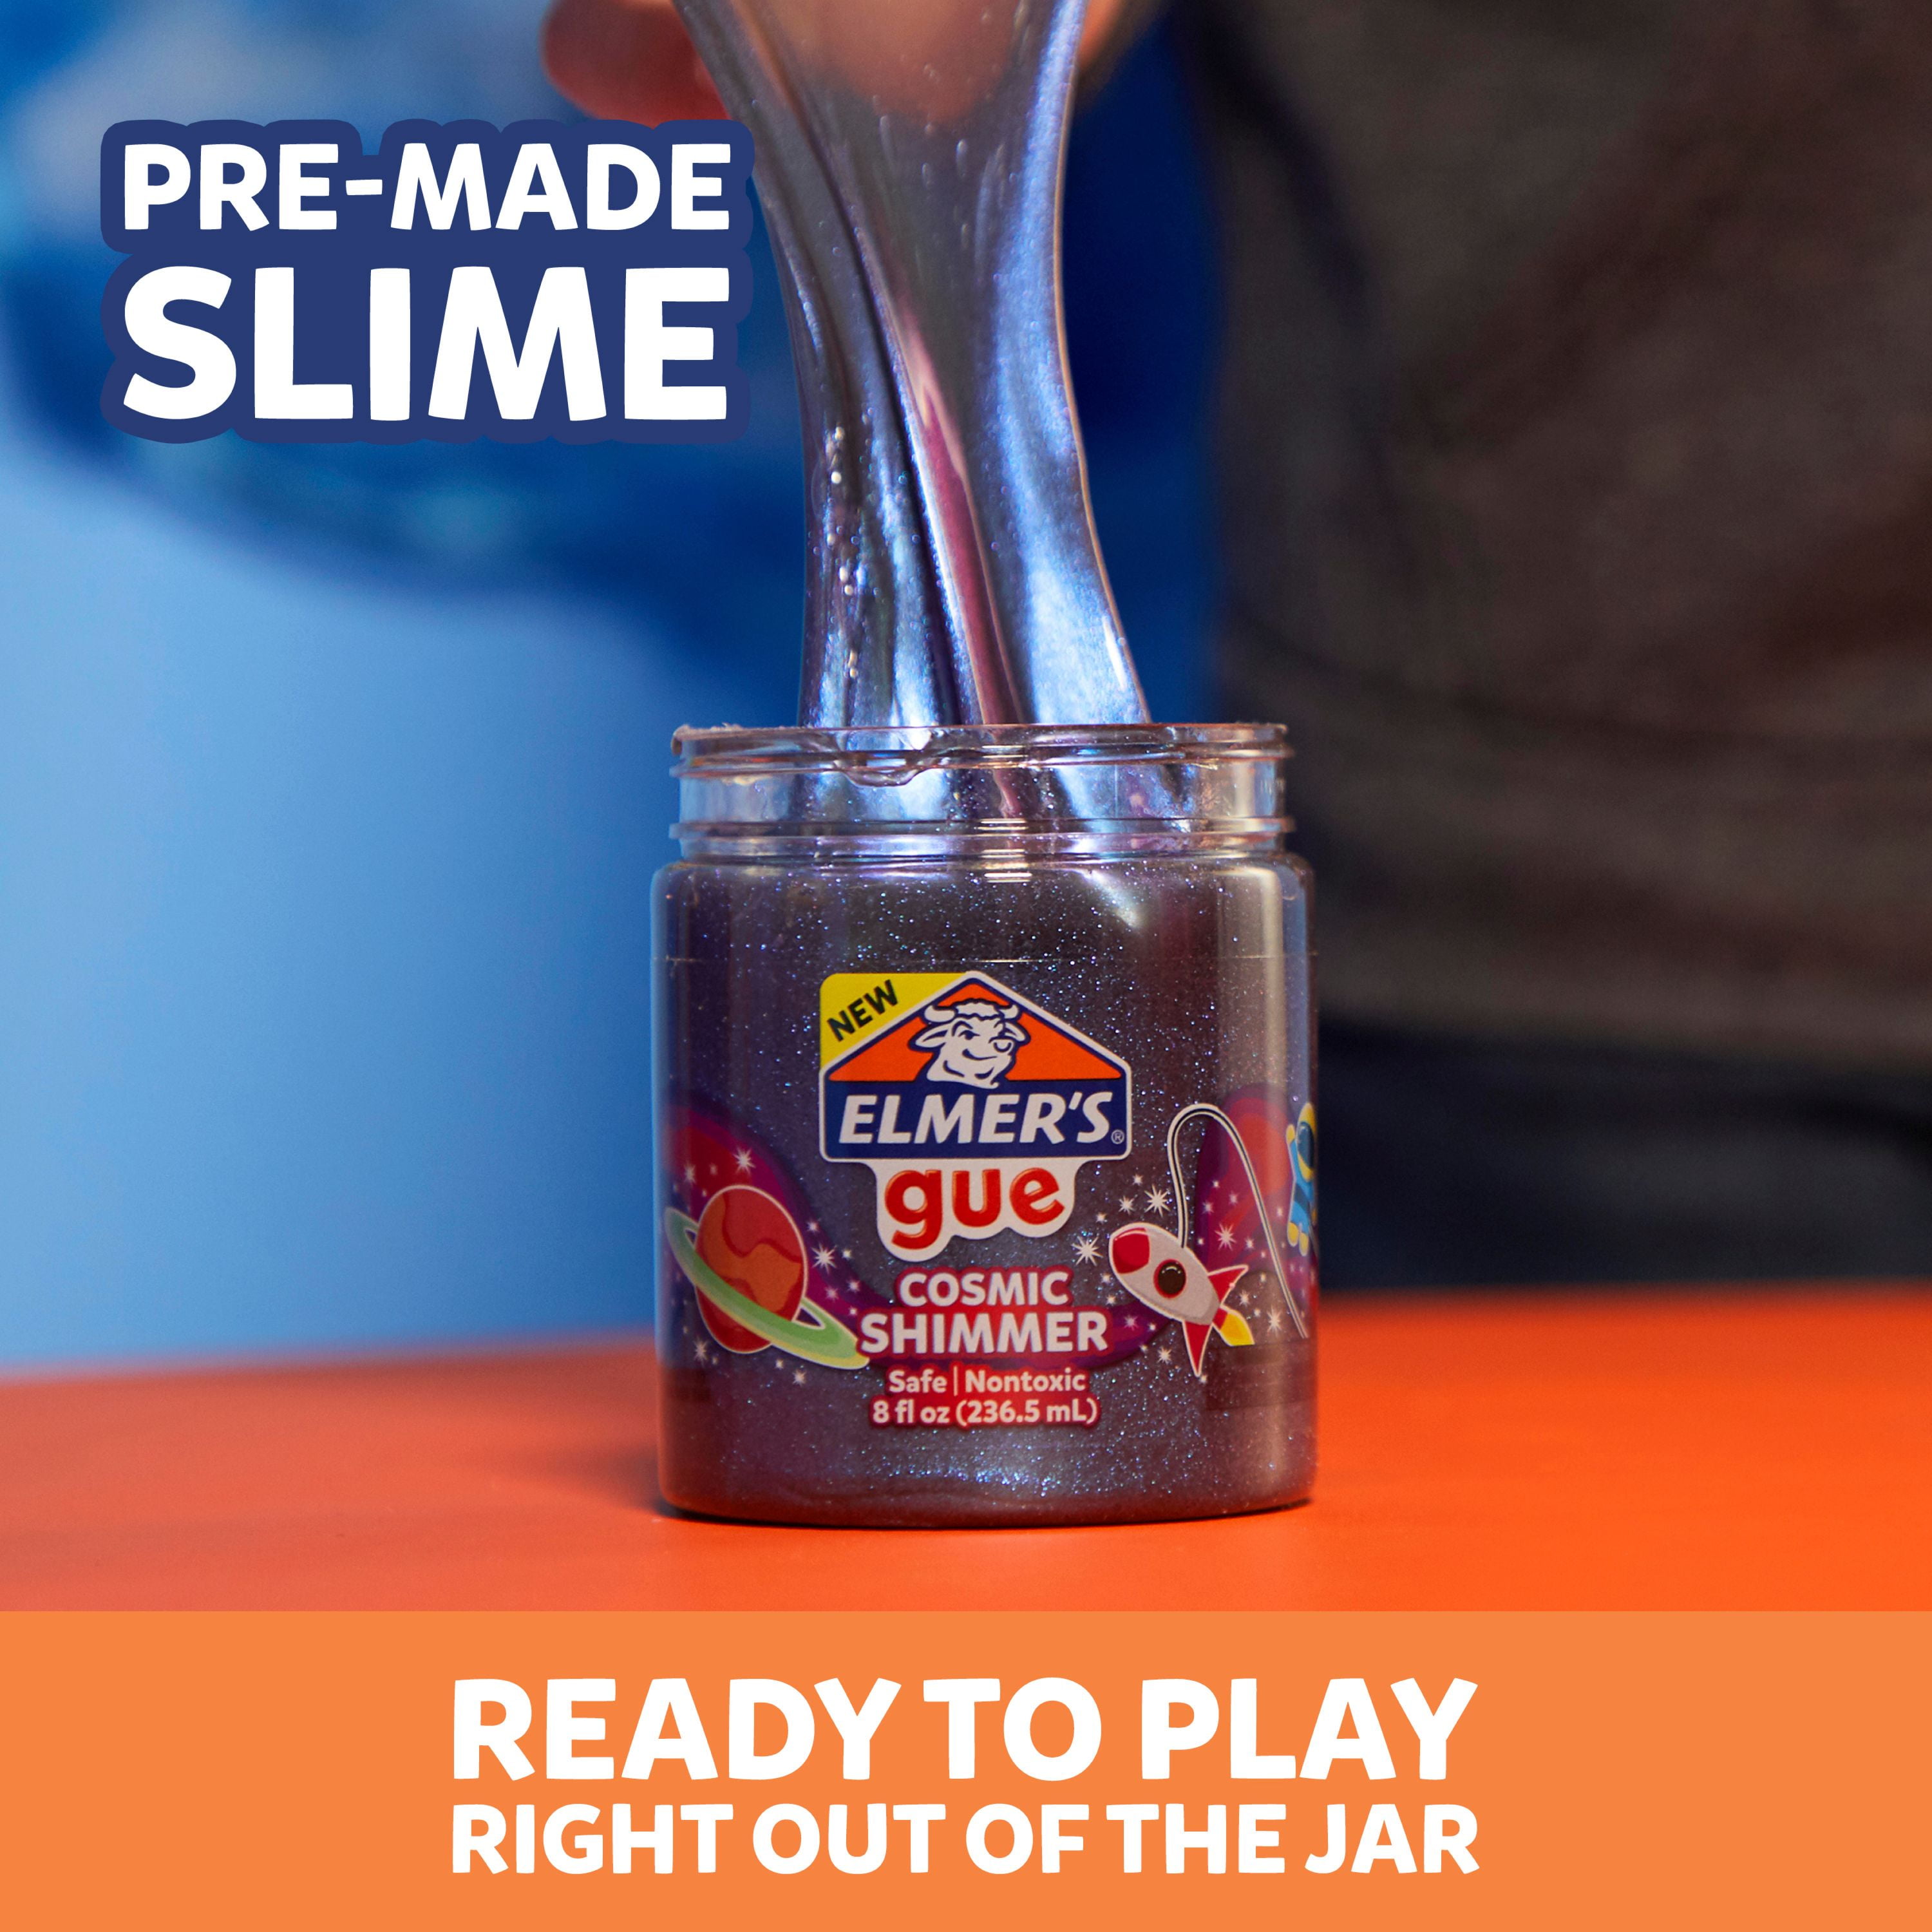 rating blueberry cloud elmers gue slime｜TikTok Search